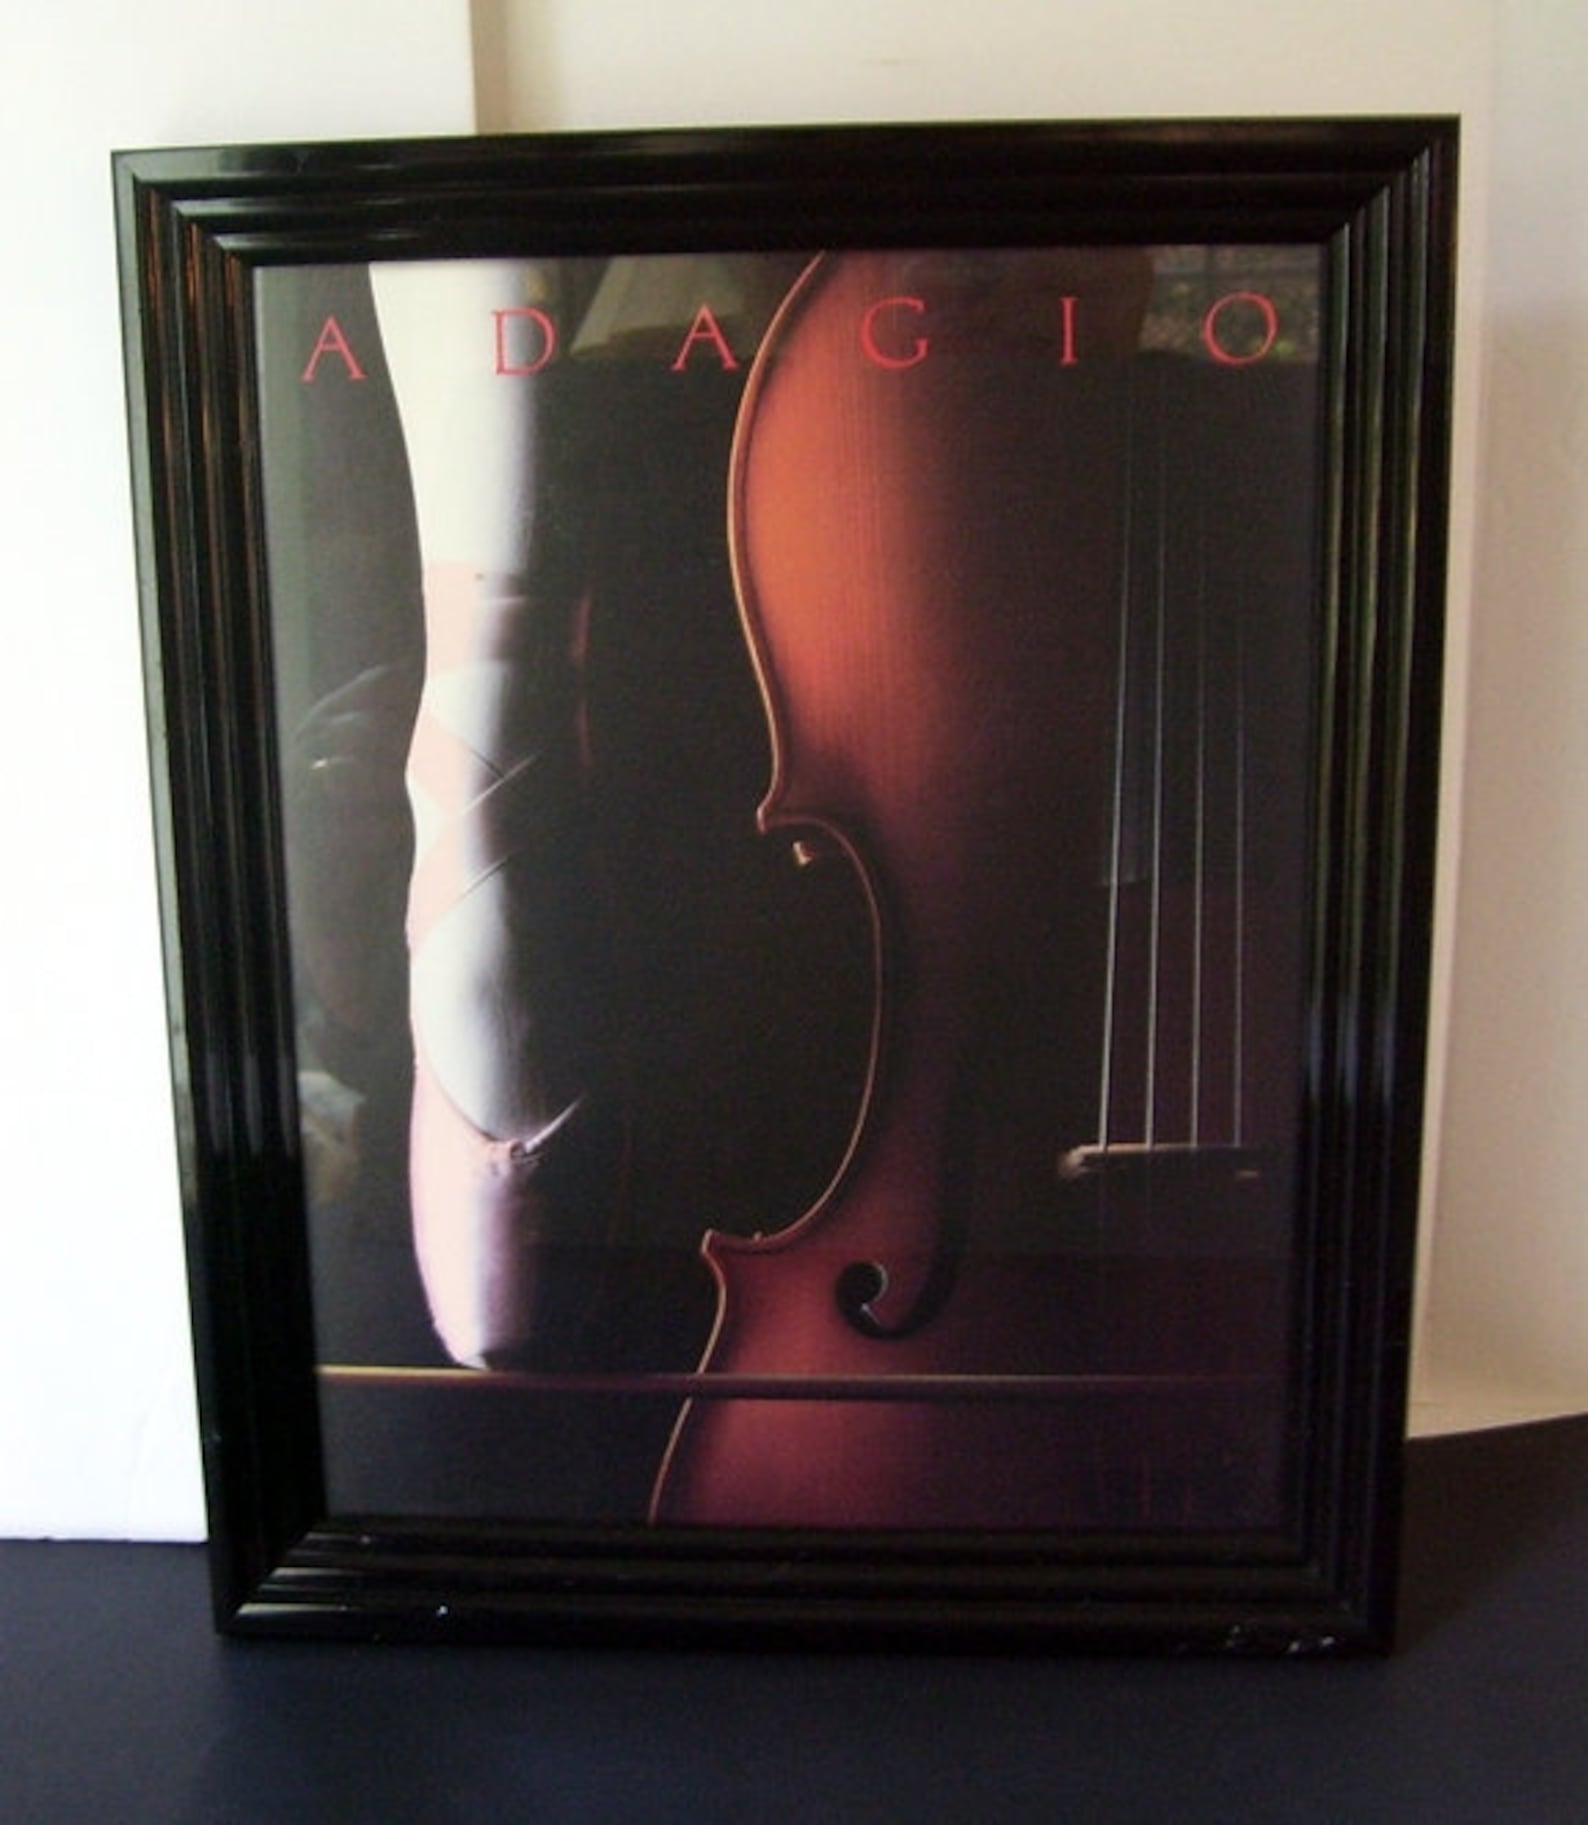 adagio ballerina with violin framed photo print, pink ballet shoes, framed wall decor, musical theme